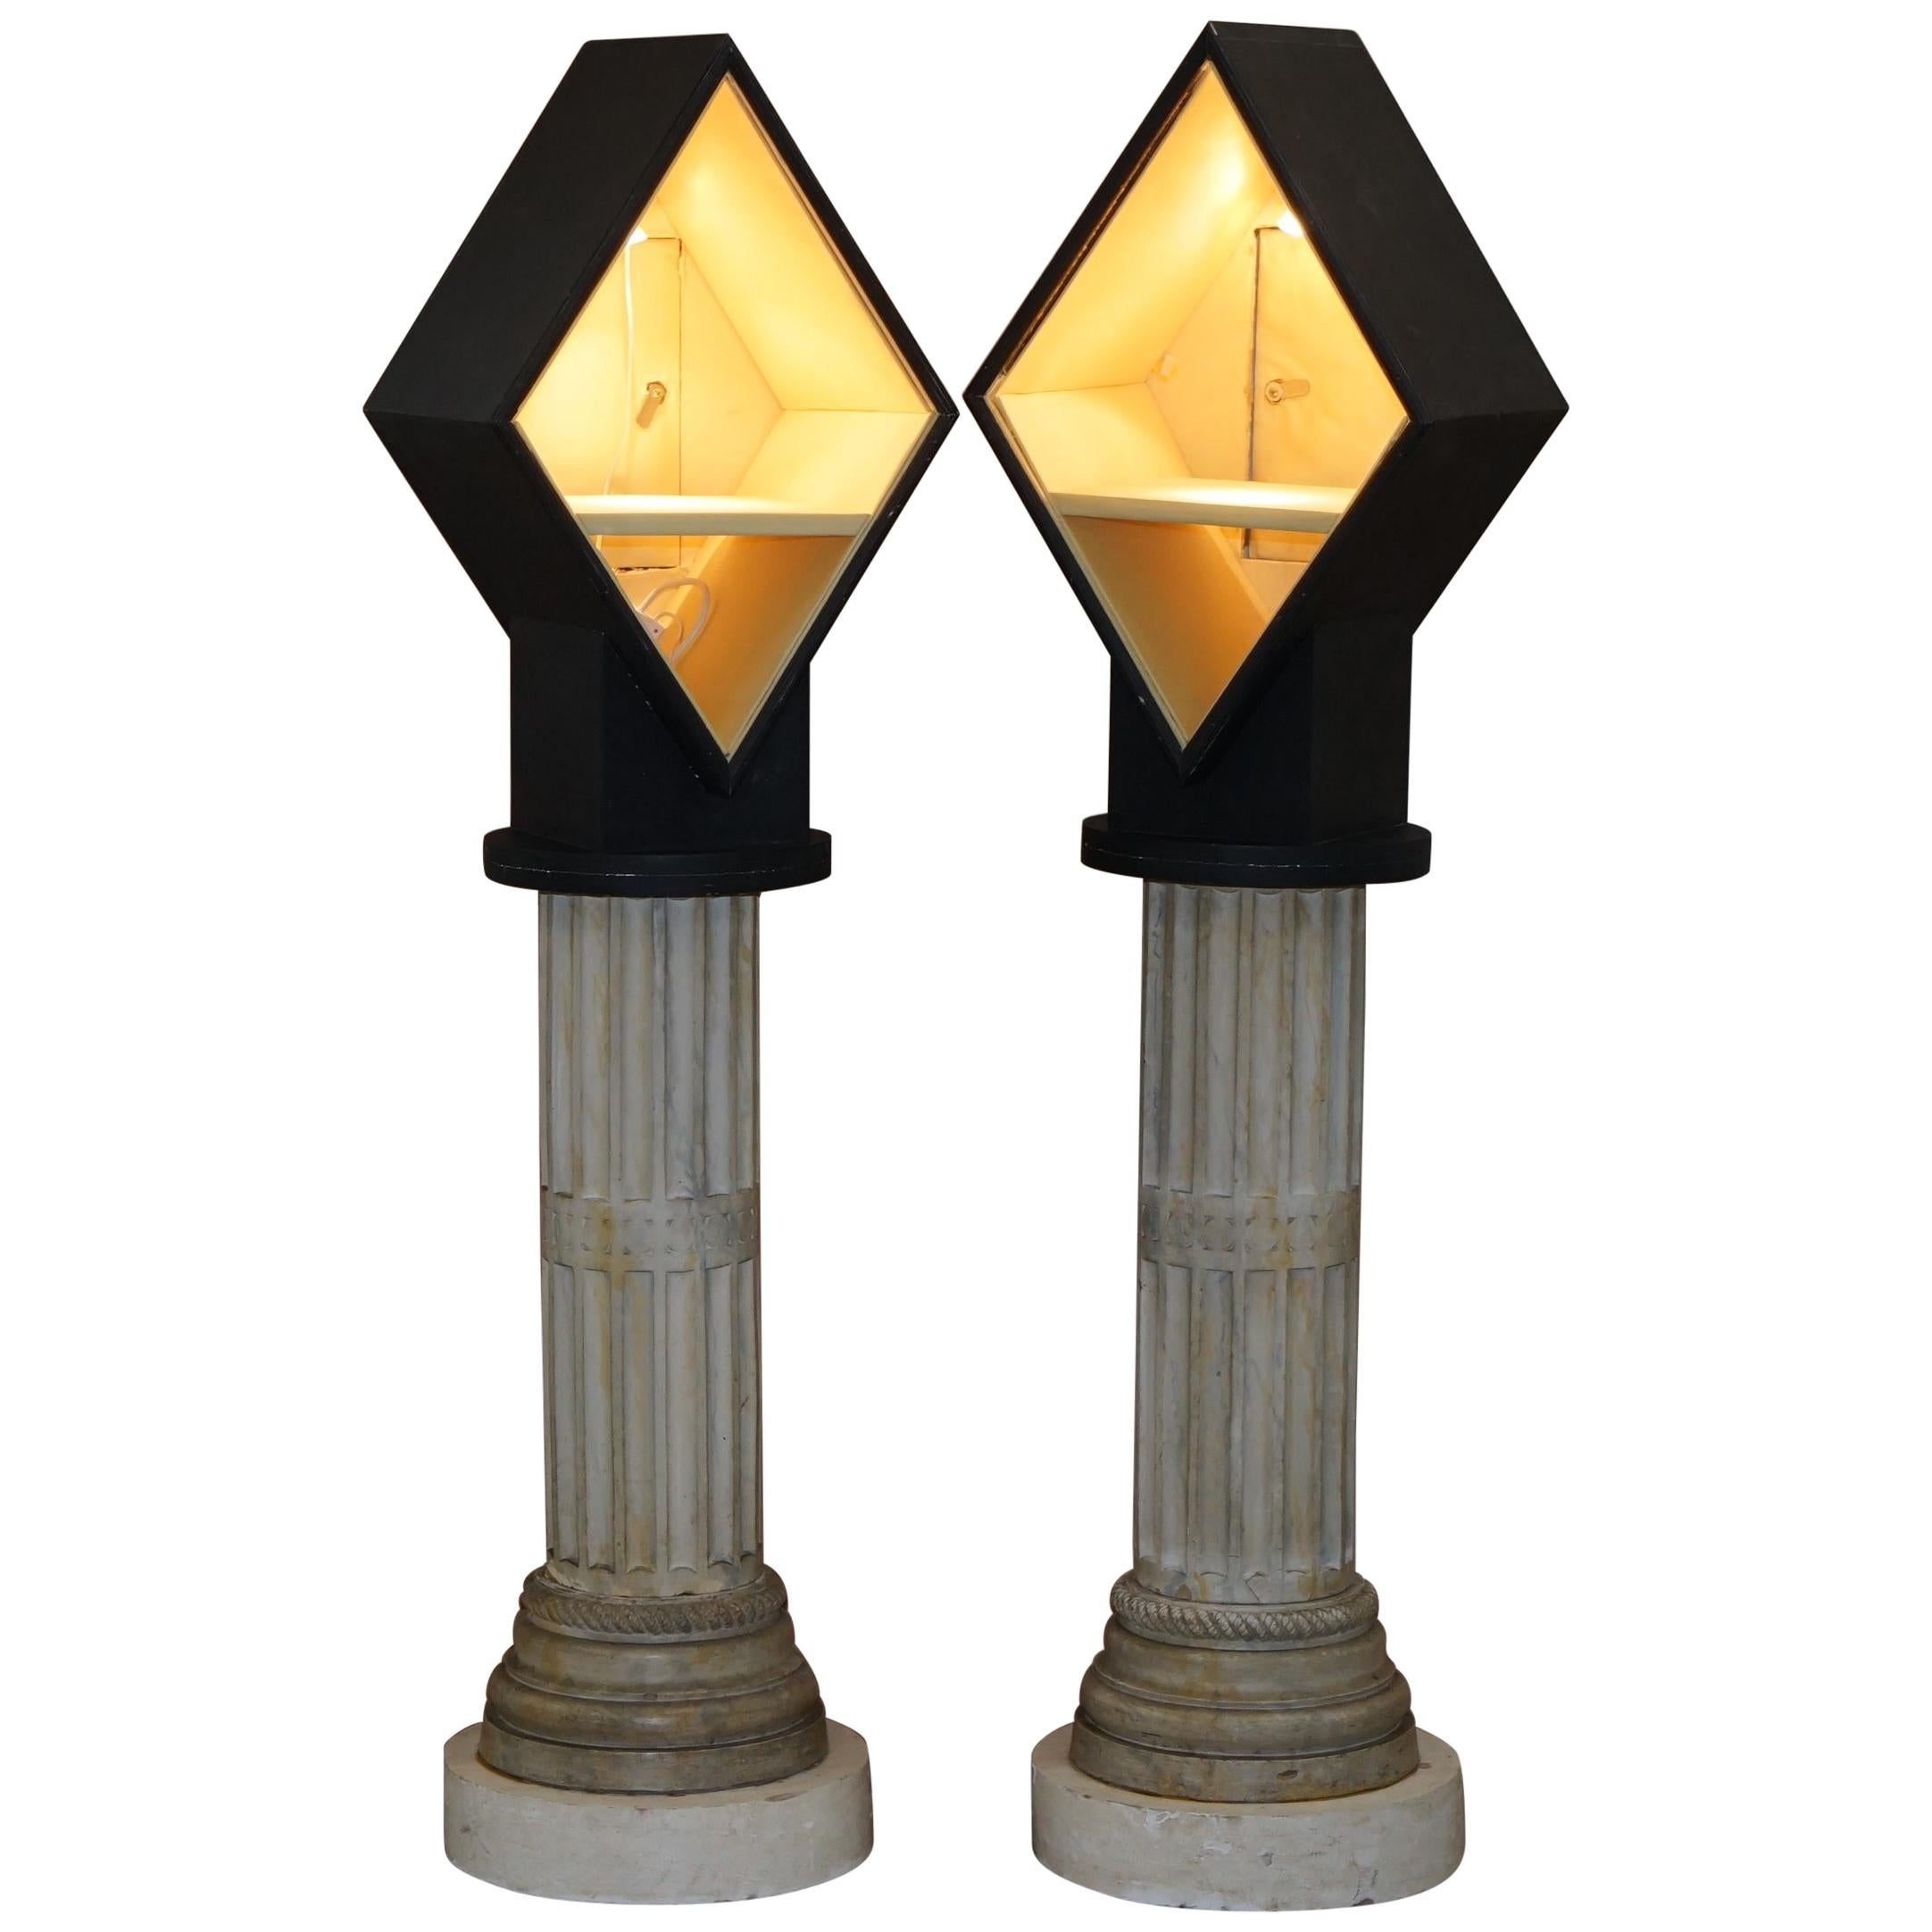 Pair of Tall Display Cabinets on Corinthian Pillars with Built in Lights